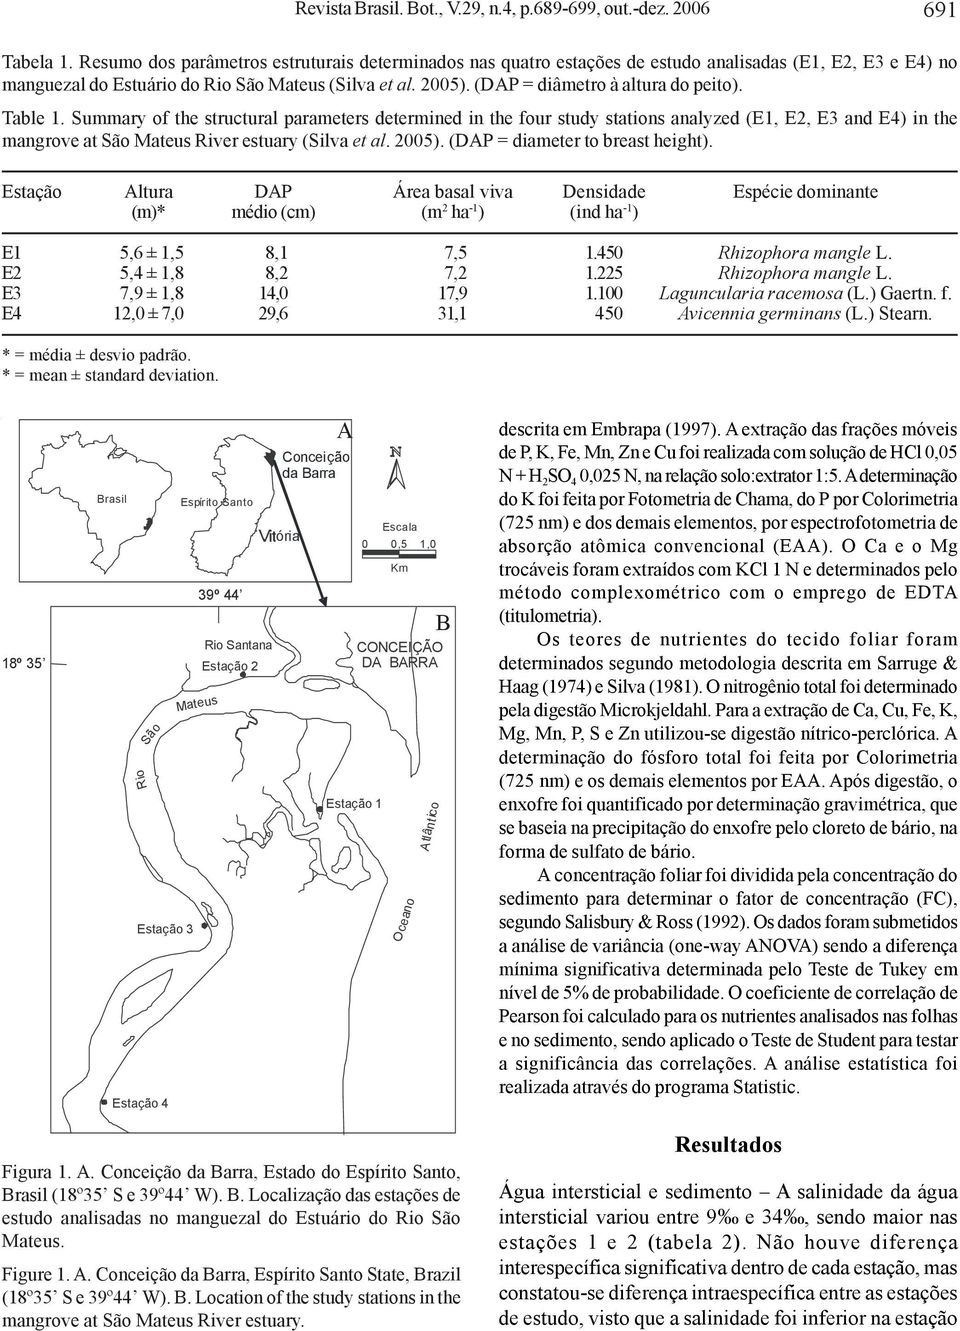 Summry of the structurl prmeters determined in the four study sttions nlyzed (E1, E2, E3 nd E4) in the mngrove t São Mteus River estury (Silv et l. 2005). (DAP = dimeter to rest height).